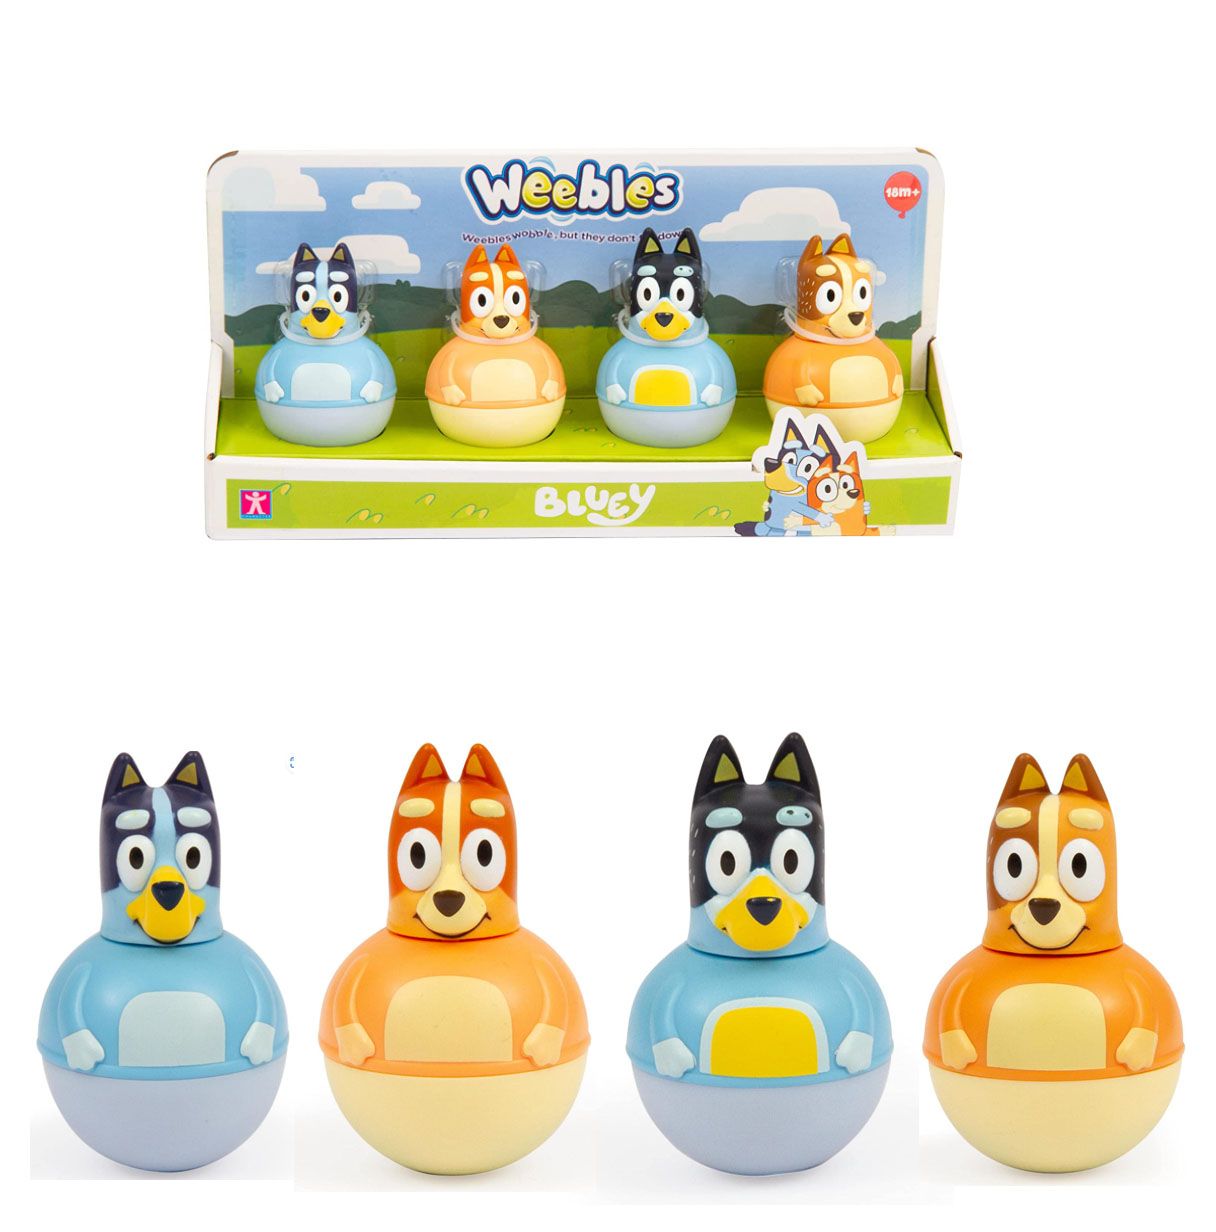 bluey 4 pack weebles ( weu02000)